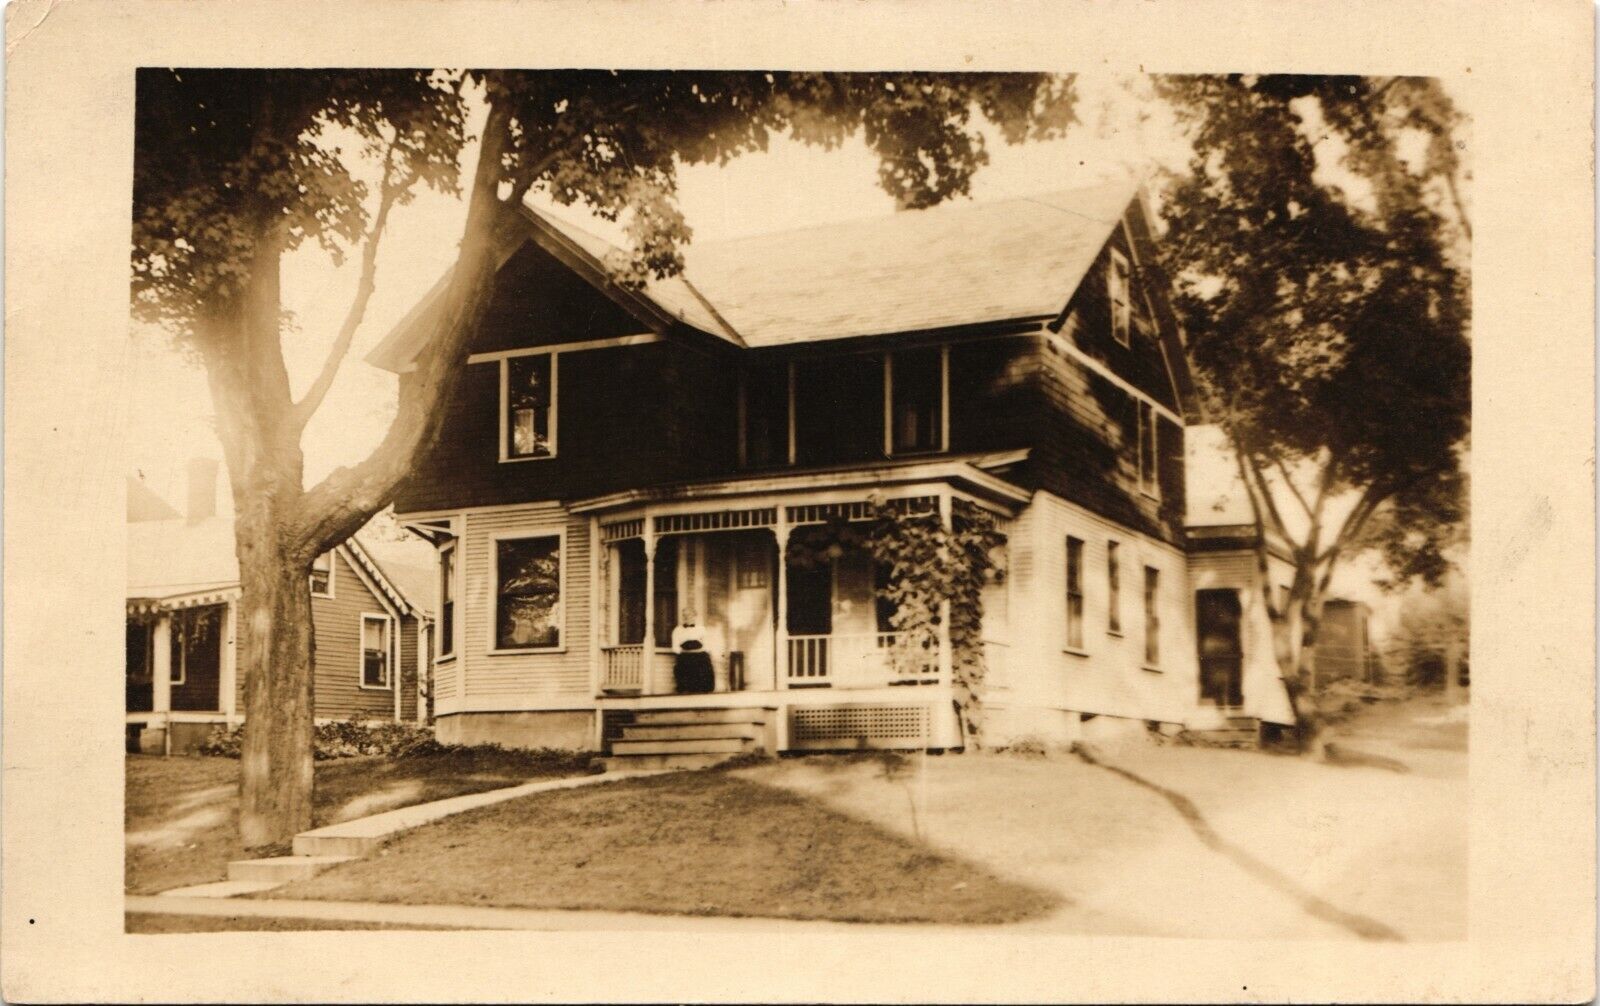 HOUSE WITH PORCH real photo postcard rppc SAXTONS RIVER VERMONT VT